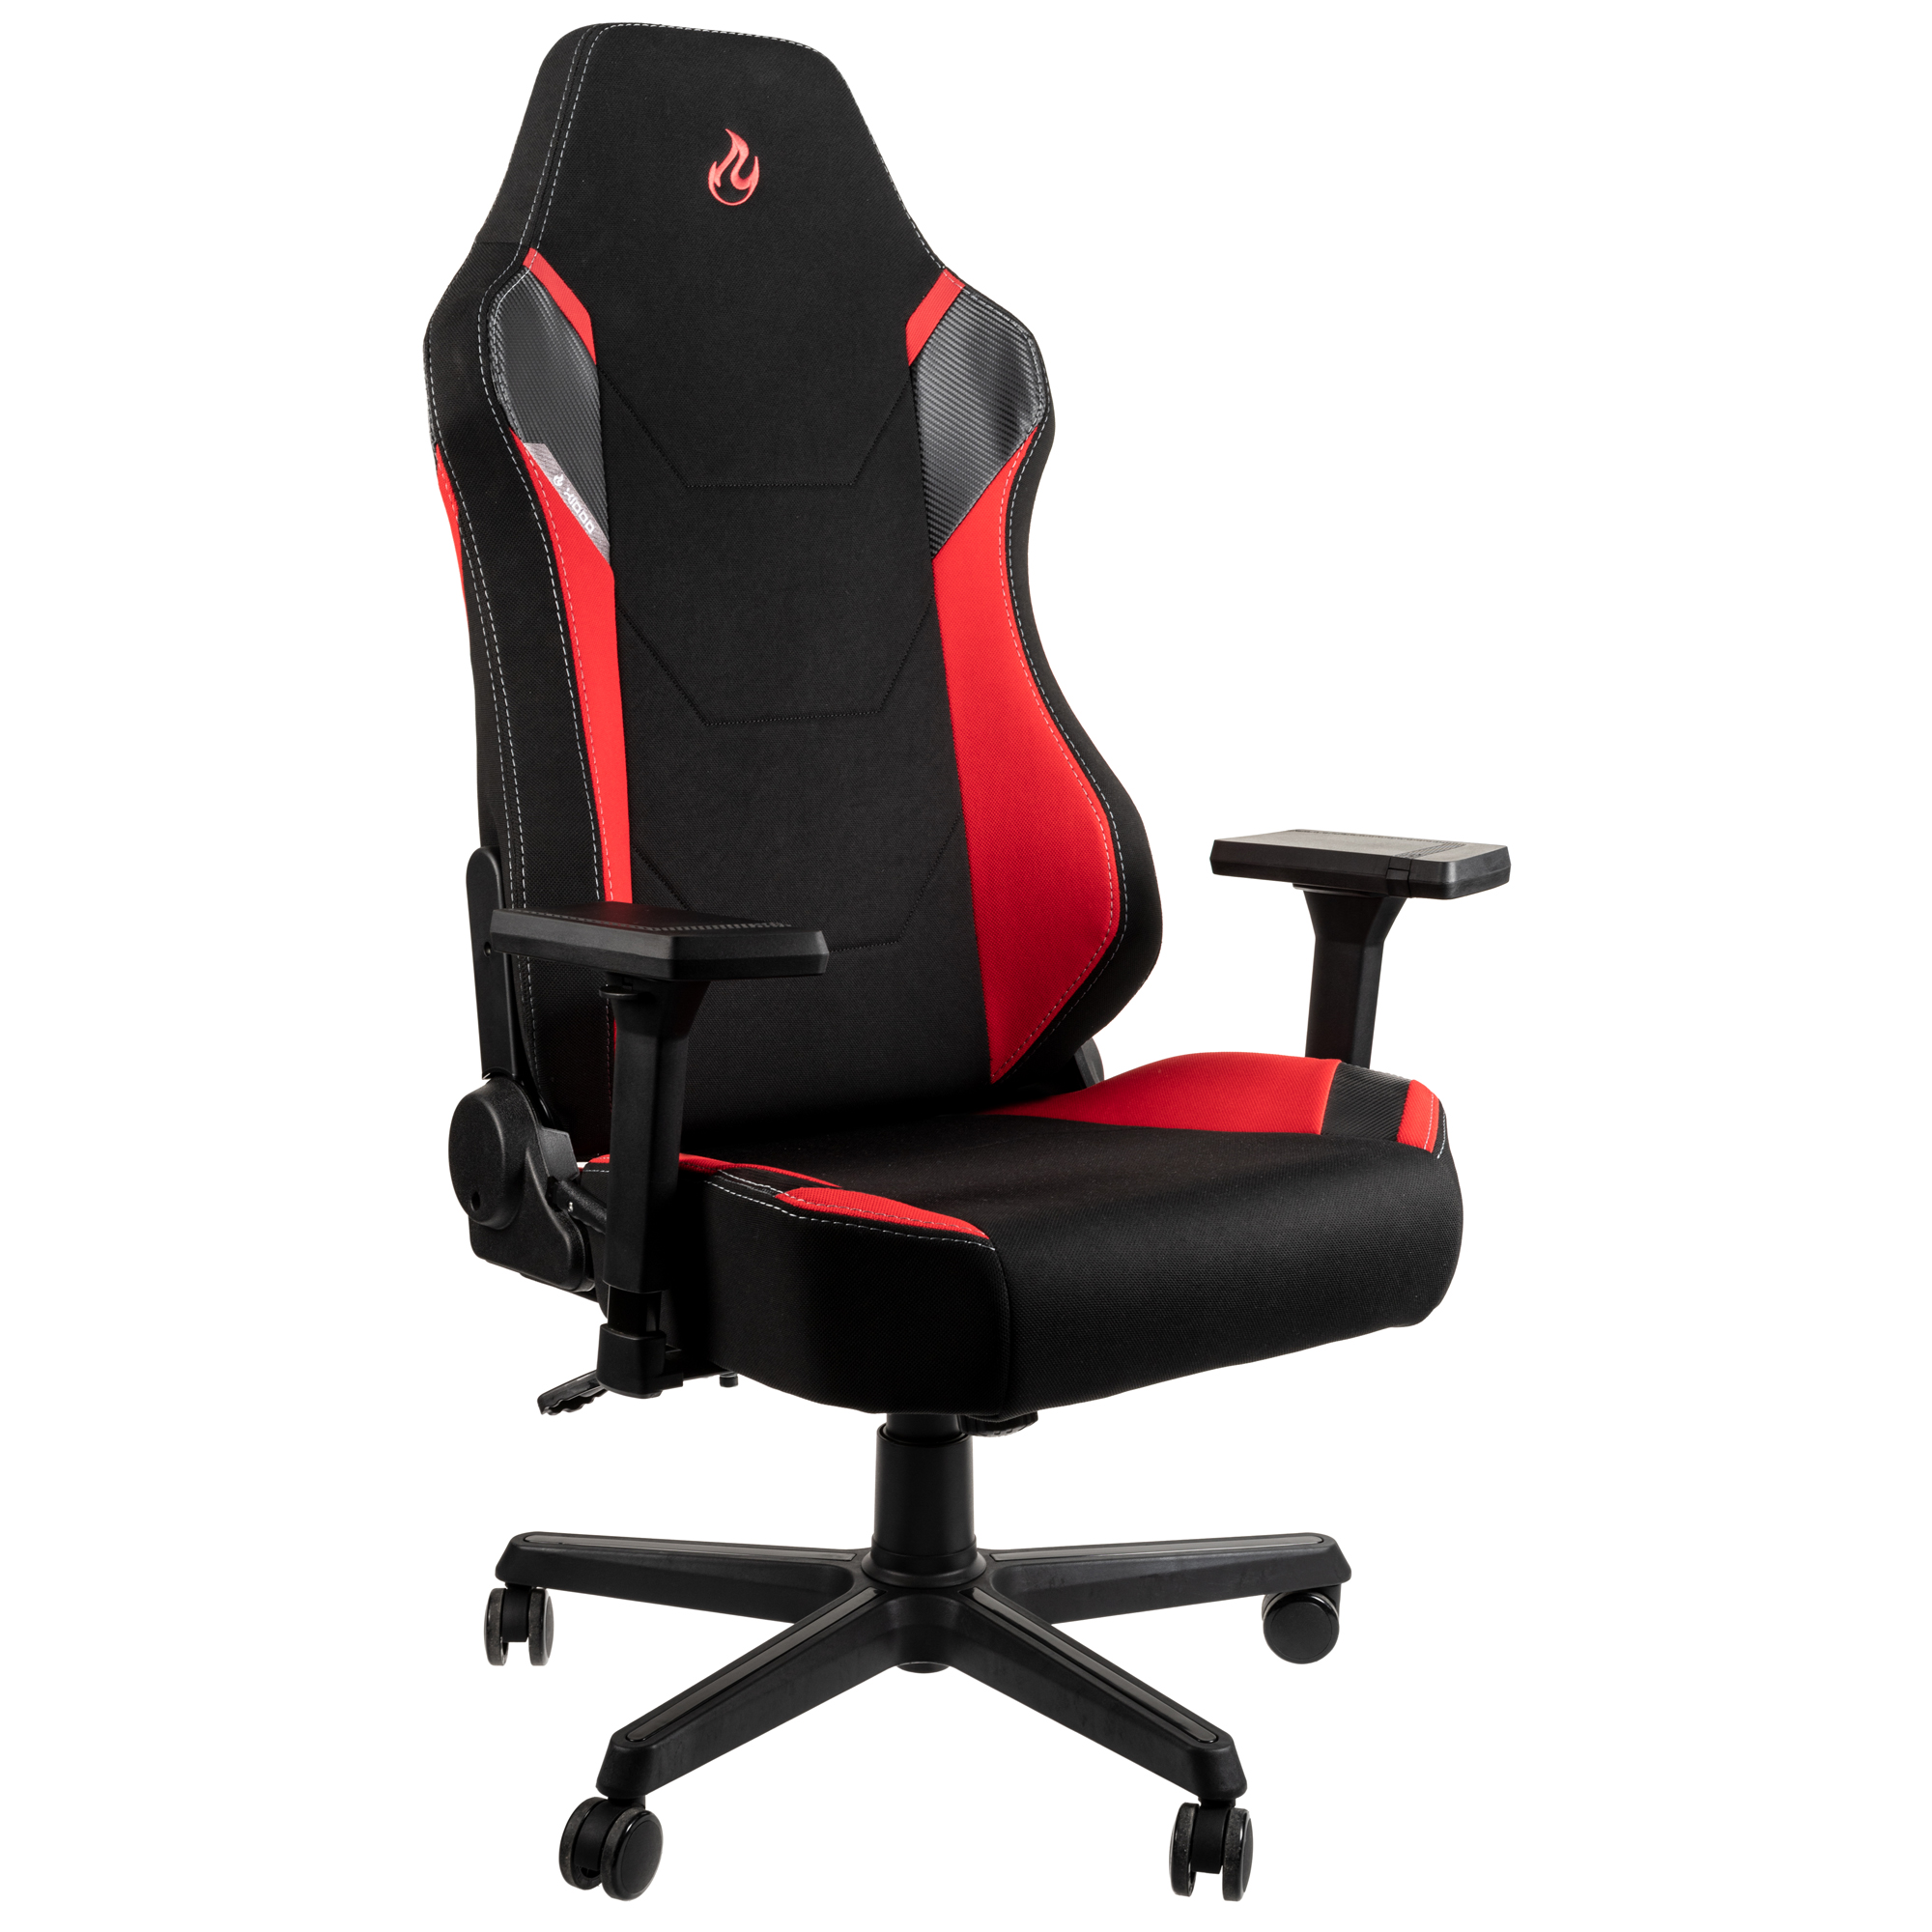  - X1000 Gaming Chair Black/Red